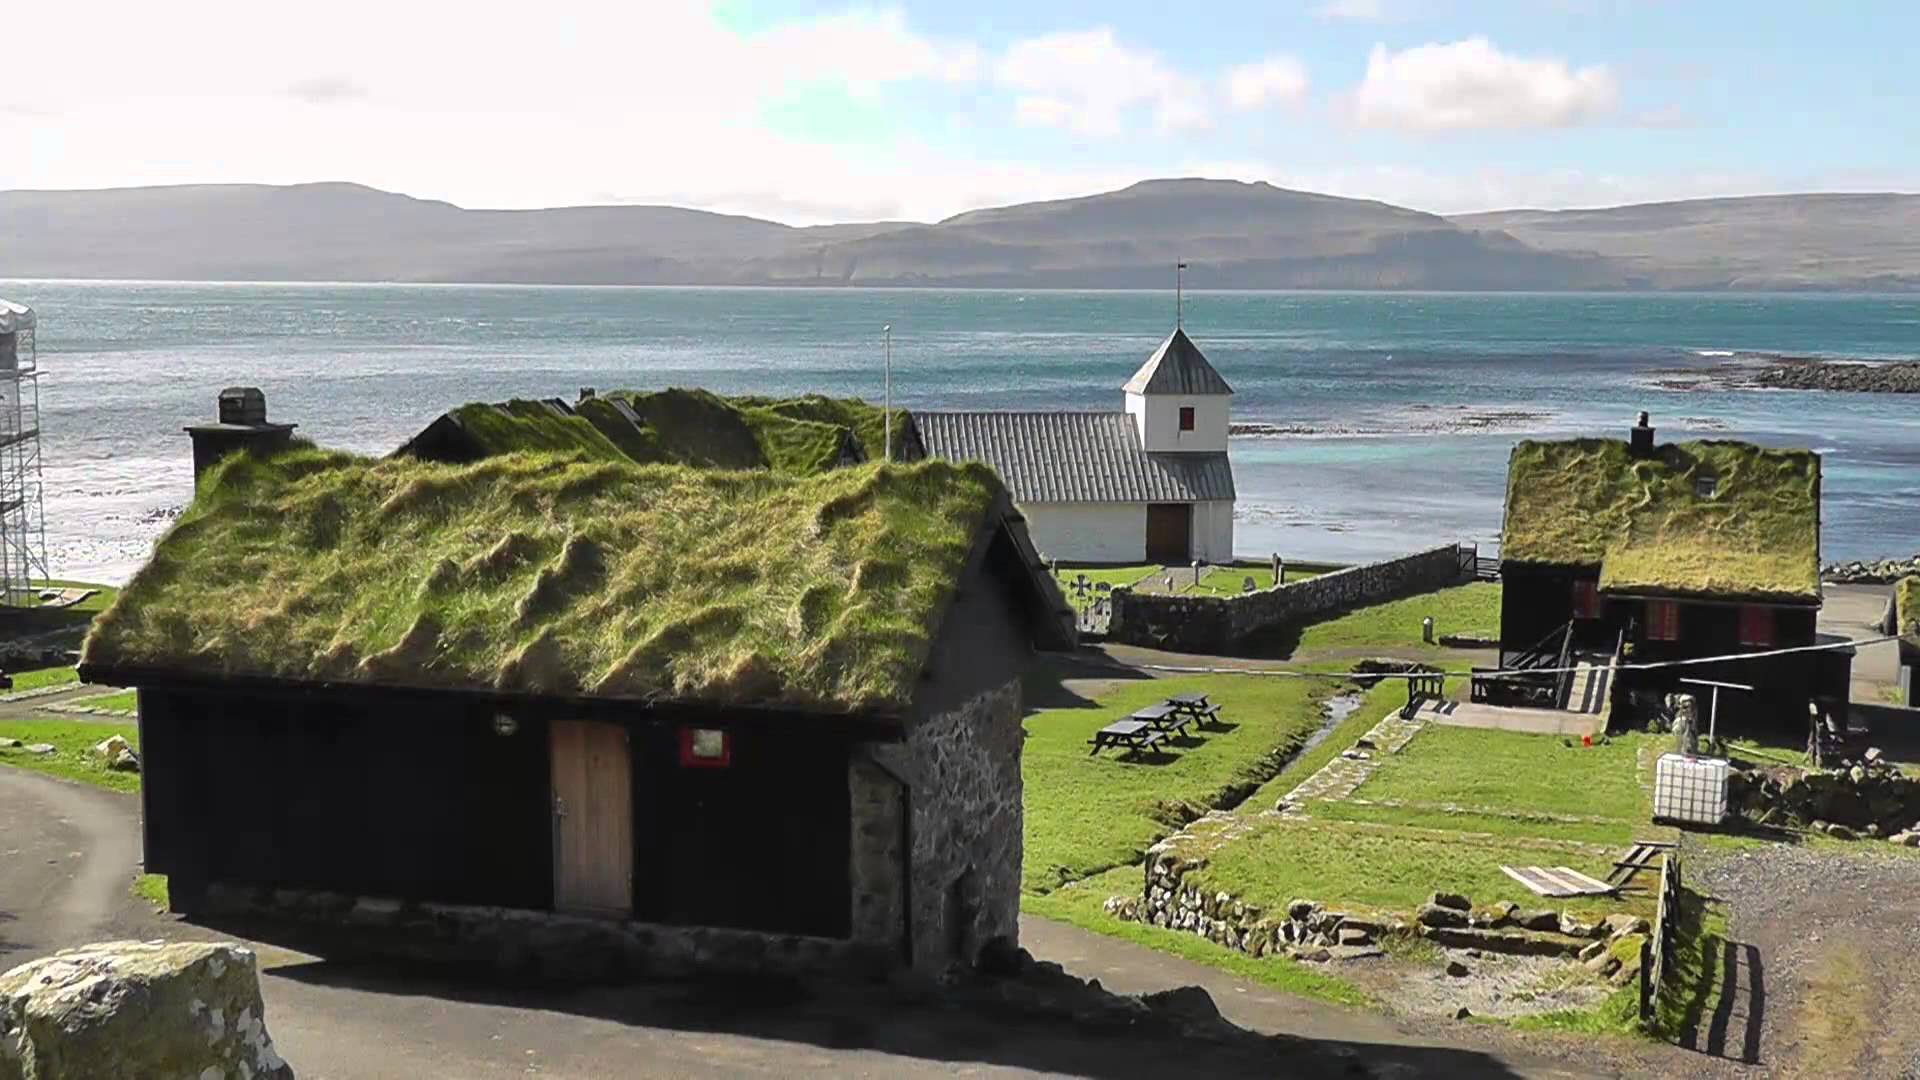 Sod hut. Double click here to get a video of the Faroe Islands.